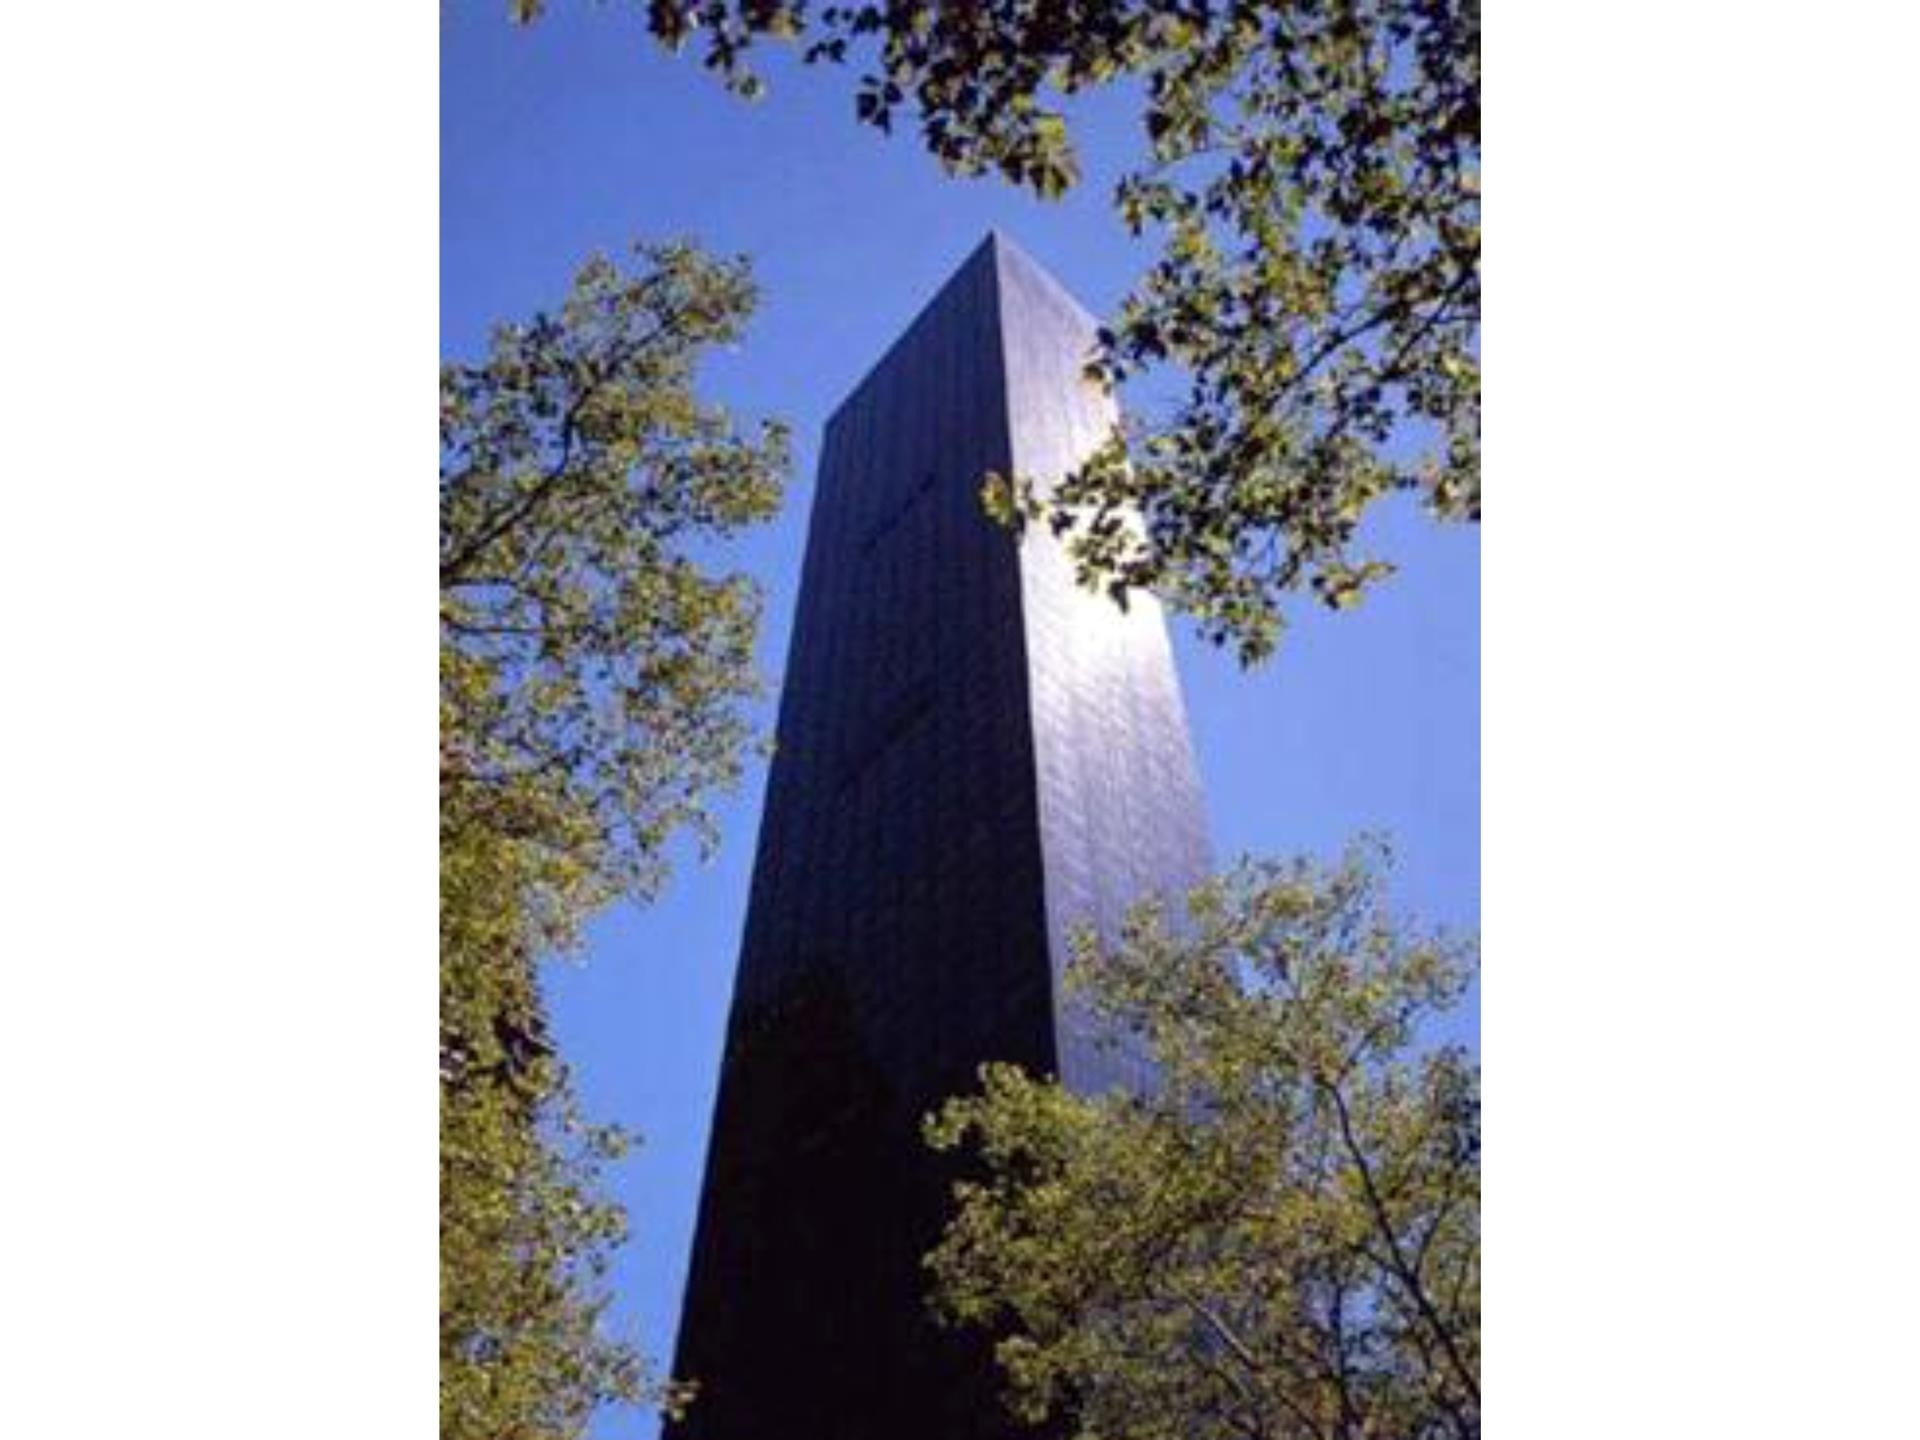 23. Condominiums for Sale at Trump World Tower, 845 UNITED NATIONS PLZ, 75C Turtle Bay, New York, New York 10017